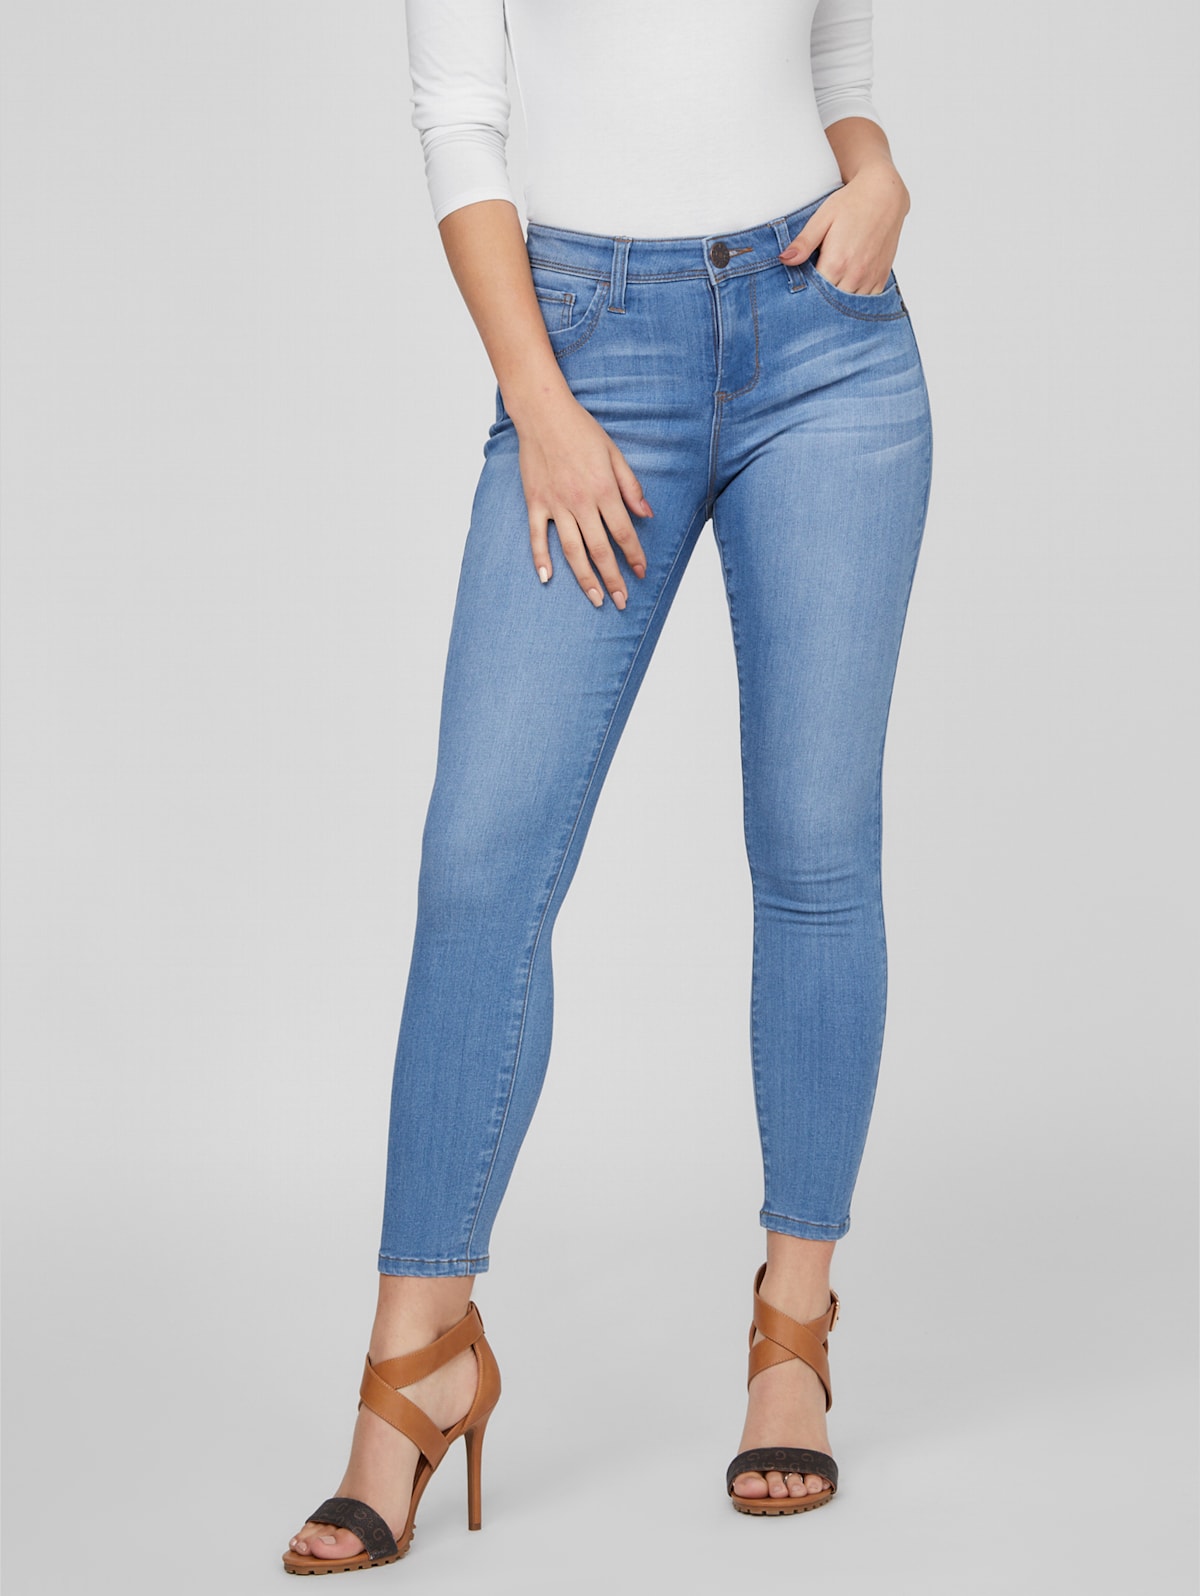 GUESS Womens Mid Rise Skinny Jean